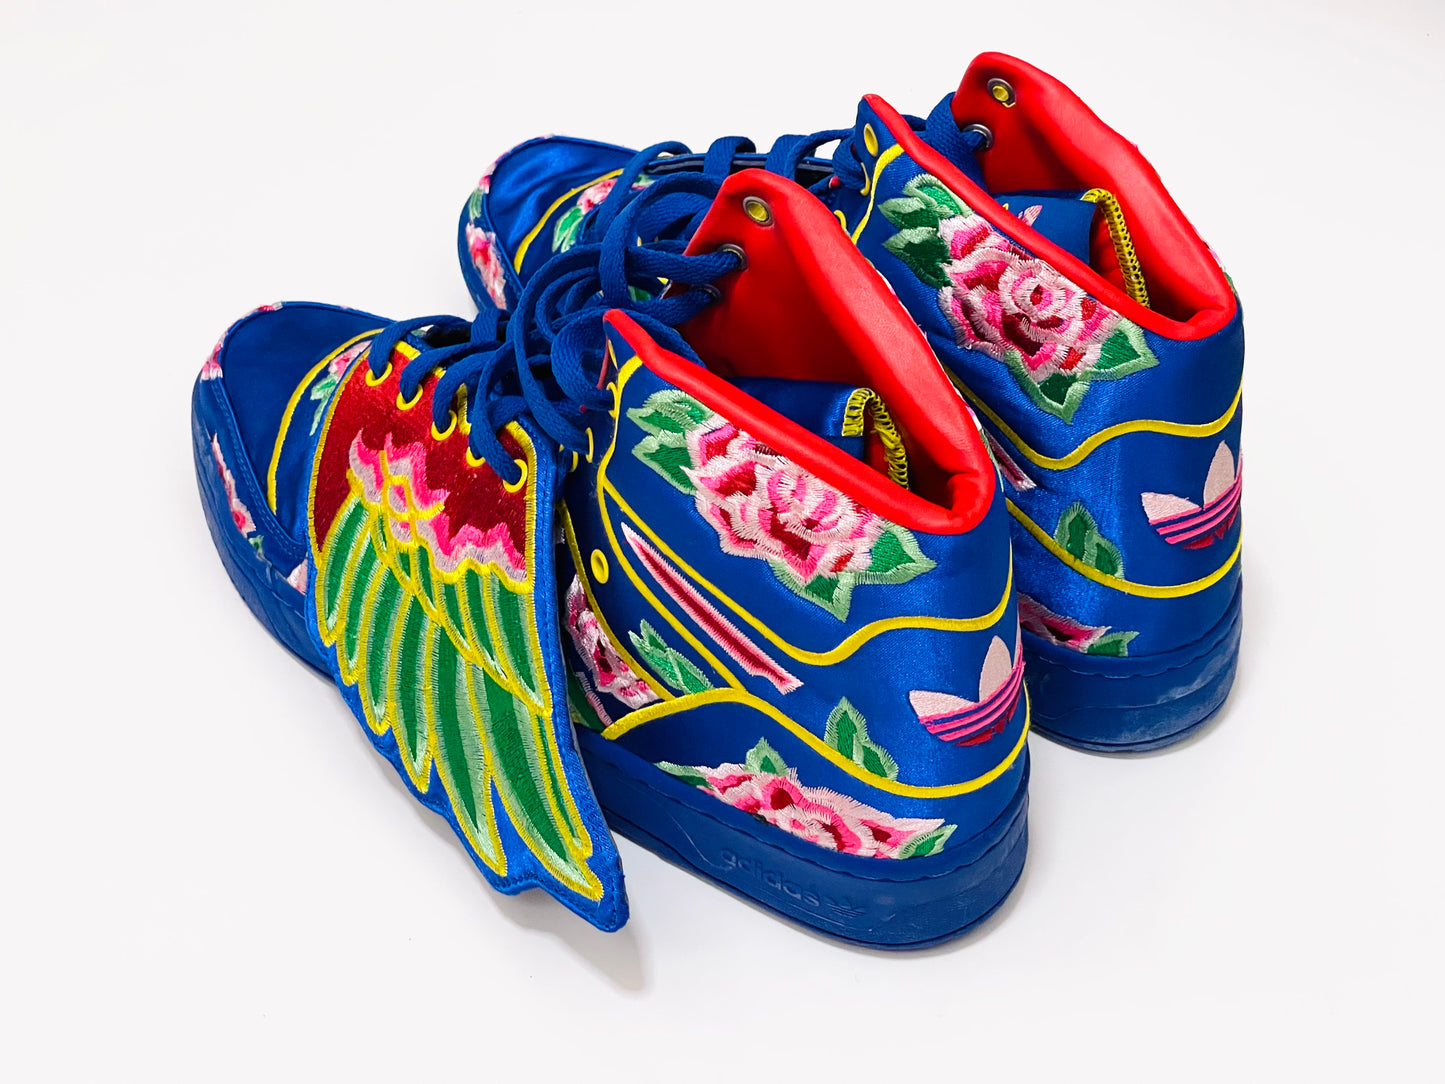 Collectible Blue Oriental Embroidery Adidas Jeremy Scott Wings Sneakers Shoes ( Size : US 9.5 Japan 27.5 cm  )